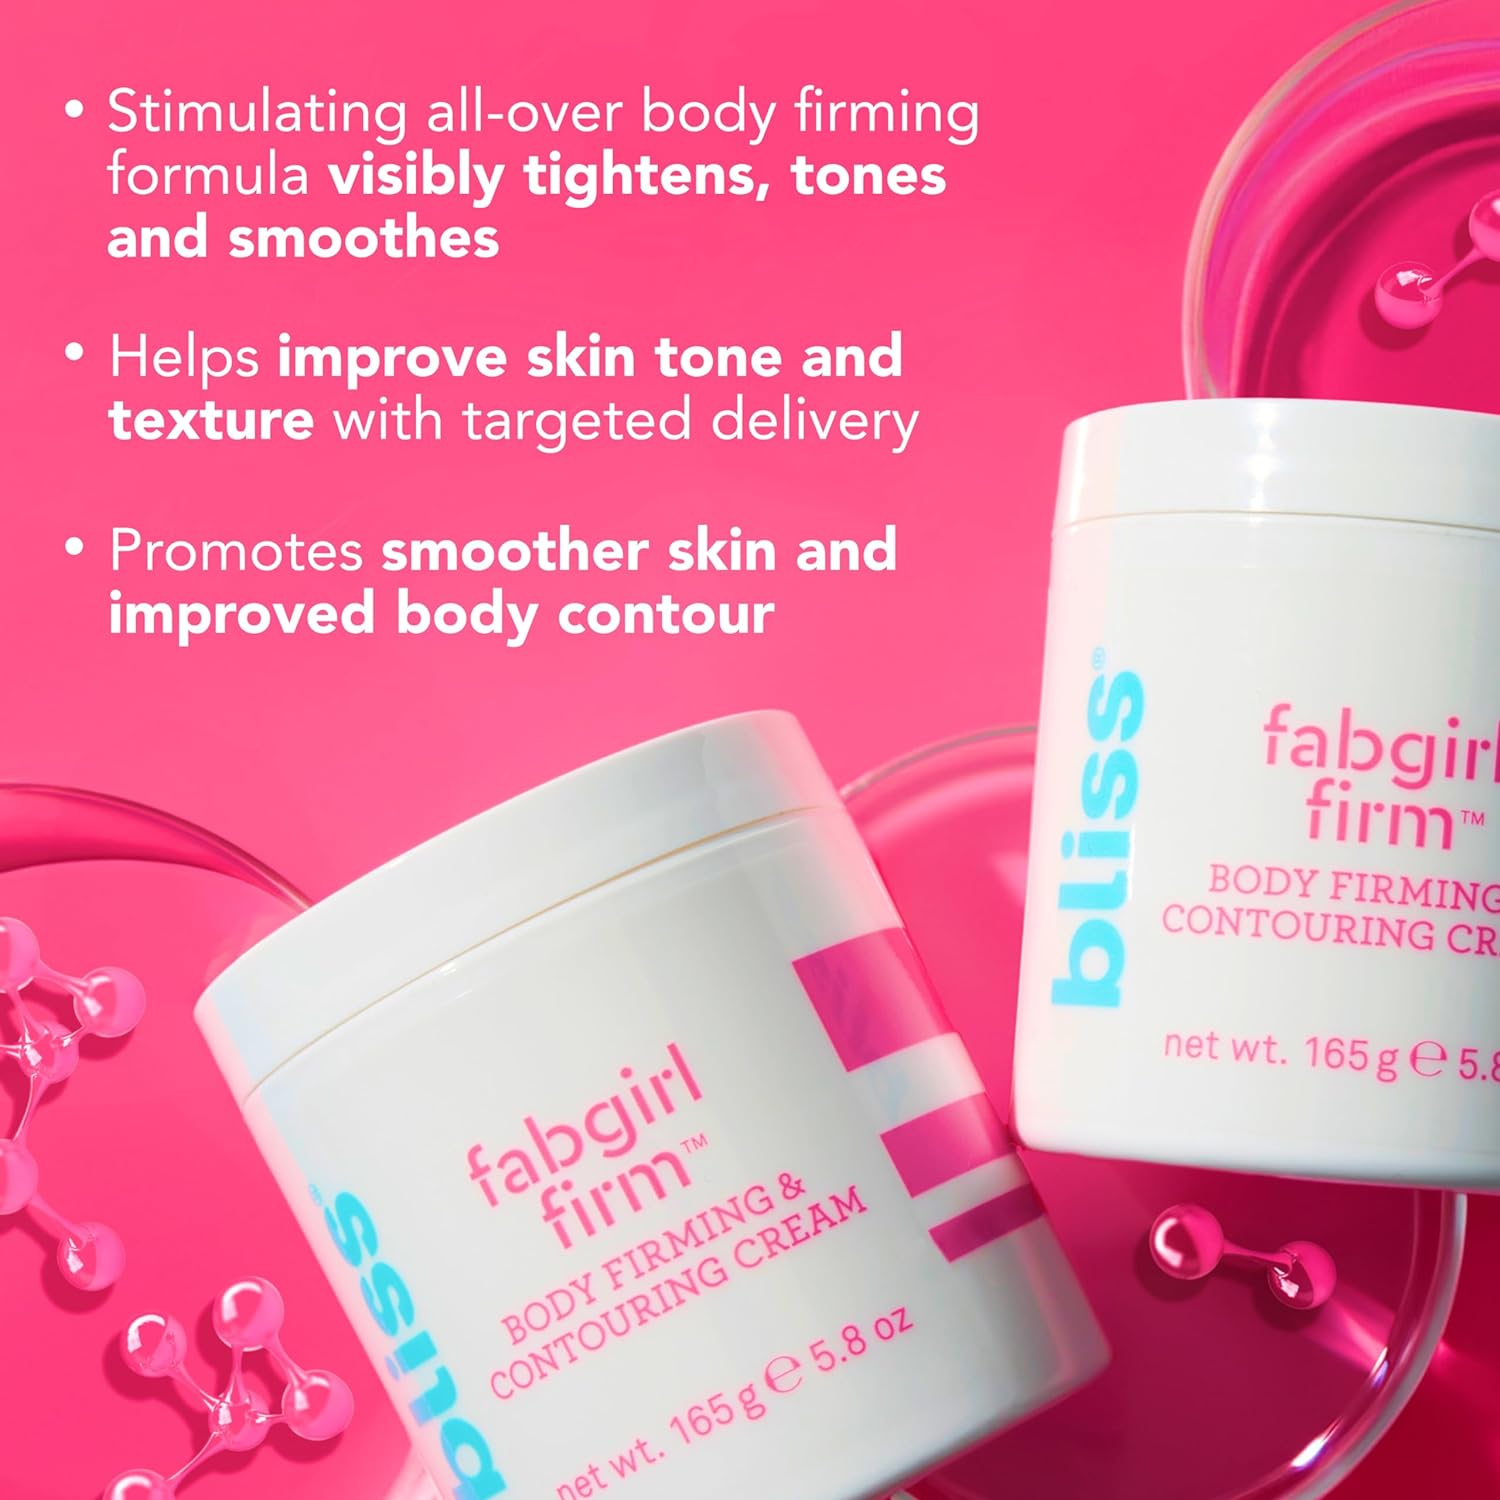 Bliss FabGirl Firm | Body Firming & Contouring Cream | Paraben Free, Cruelty Free | 5.8 fl oz : Beauty & Personal Care